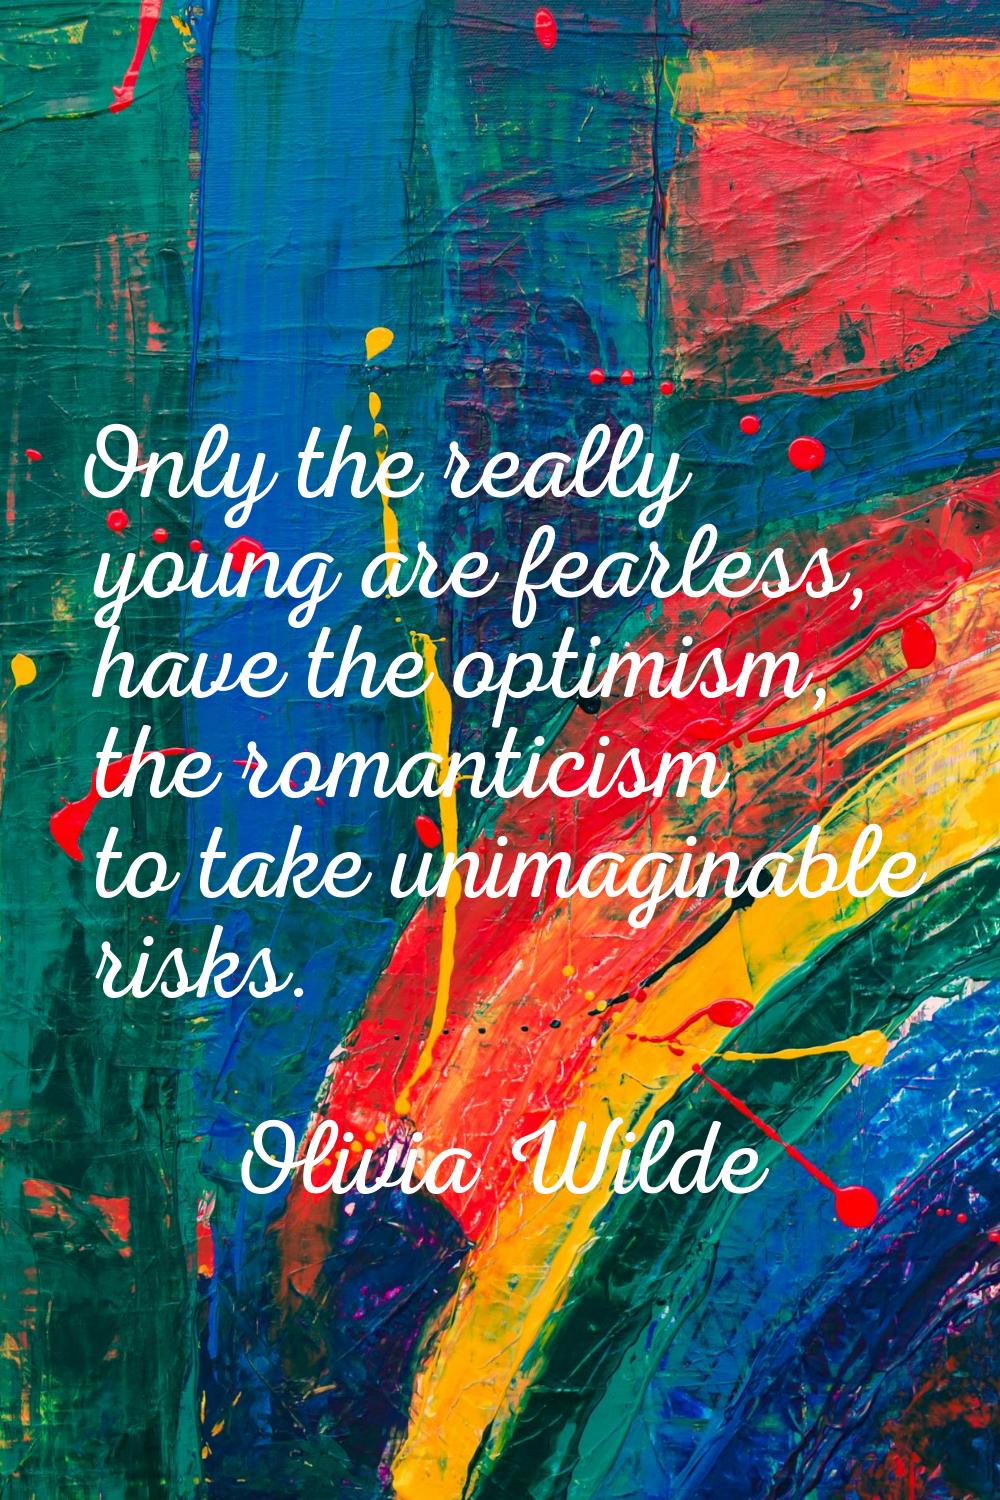 Only the really young are fearless, have the optimism, the romanticism to take unimaginable risks.